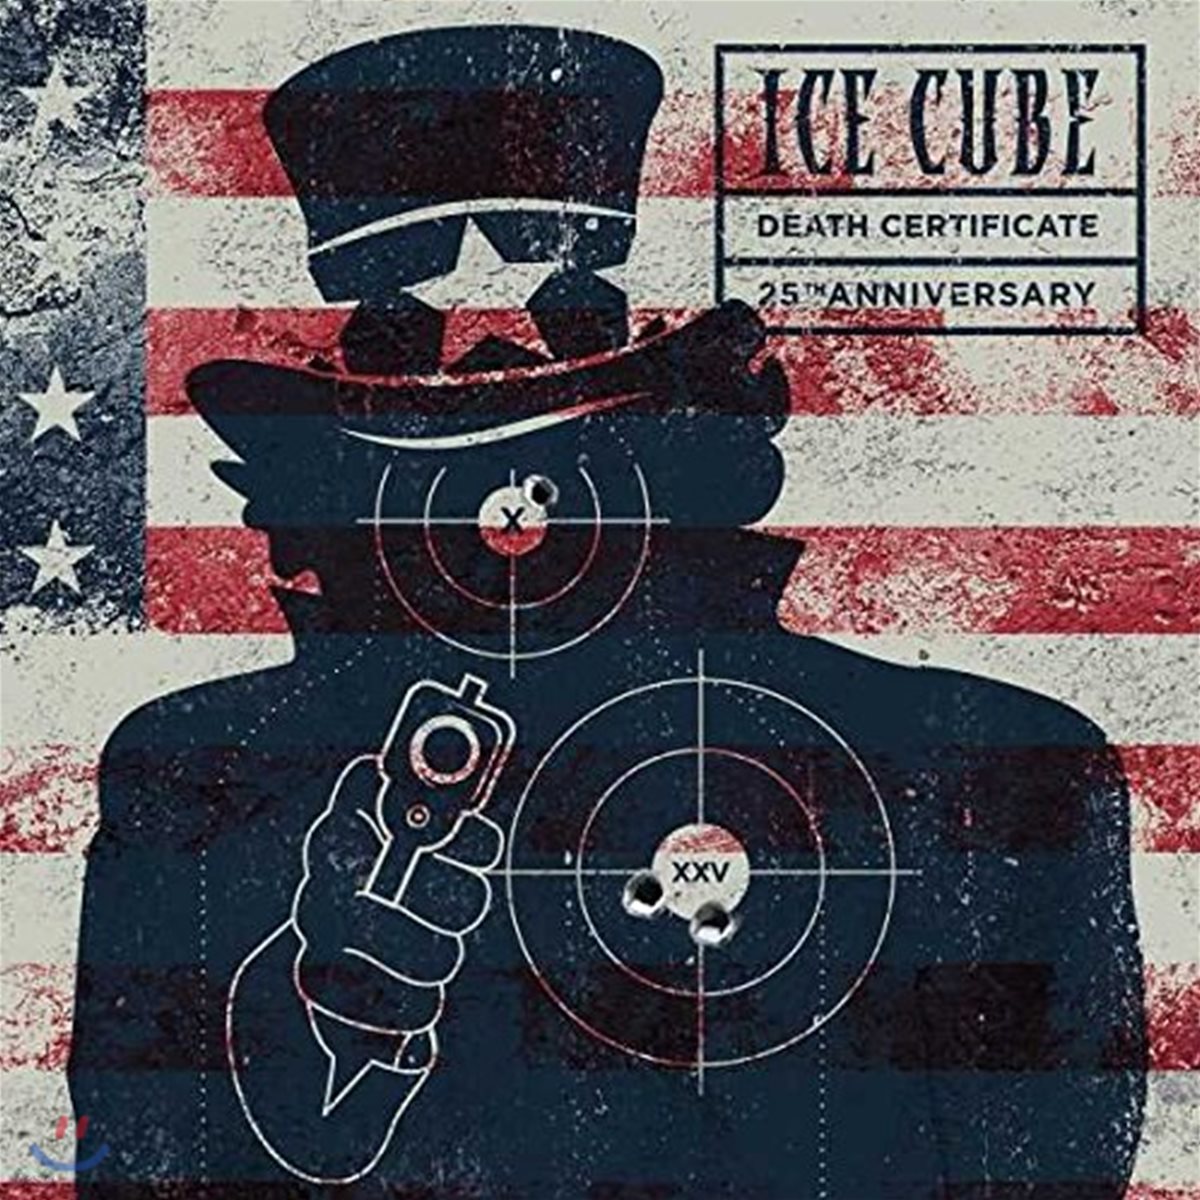 Ice Cube (아이스 큐브) - Death Certificate [25th Anniversary Edition]